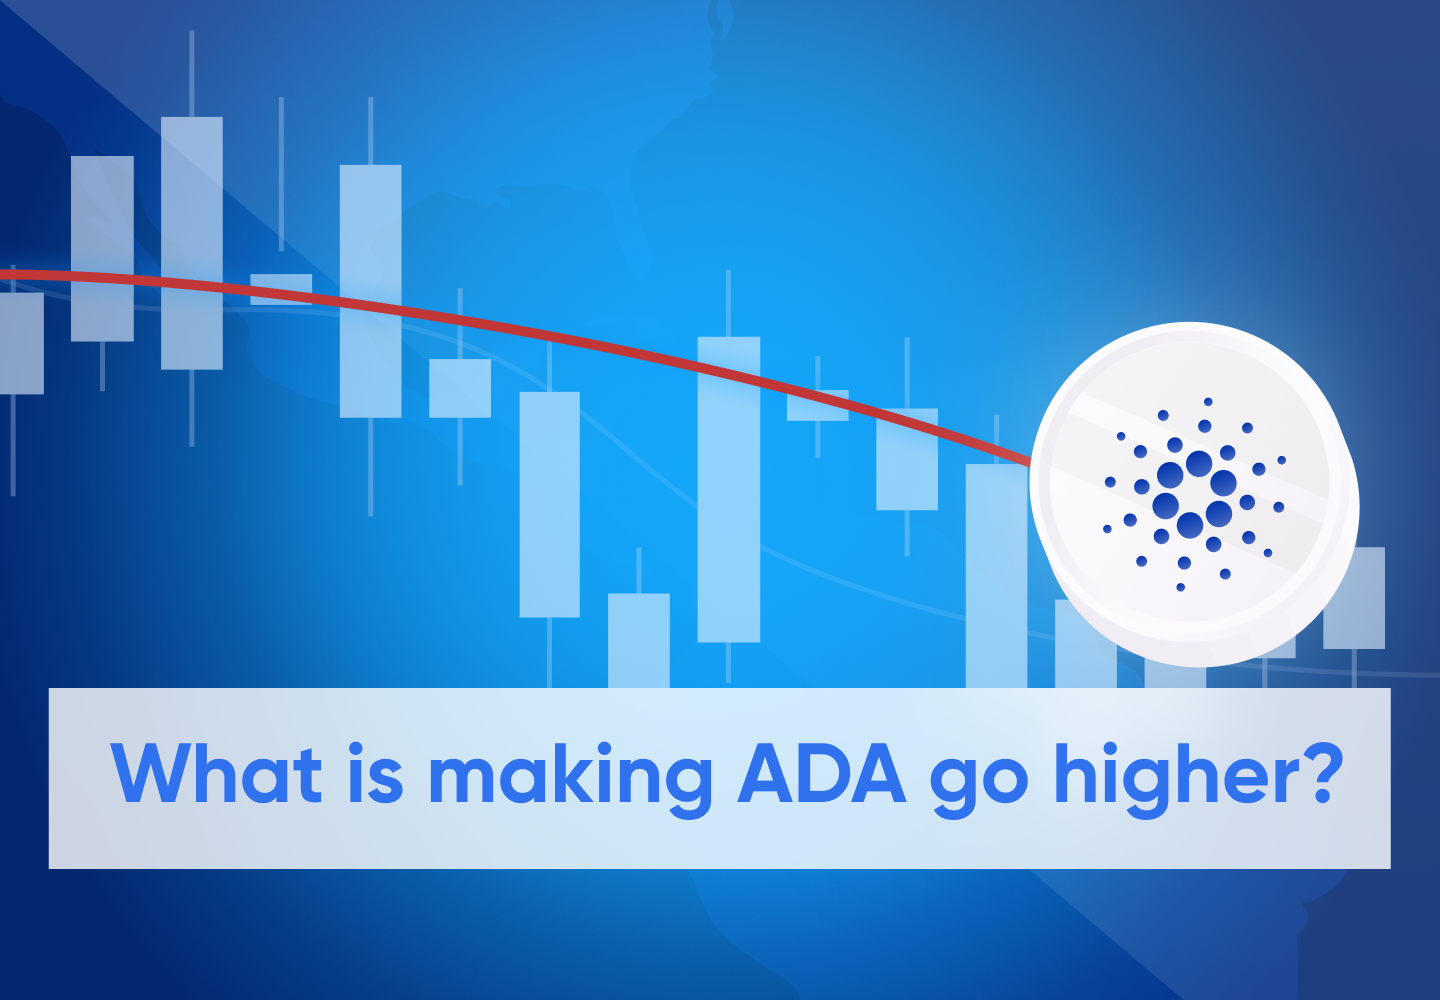 Why is Cardano (ADA) Moving Higher?